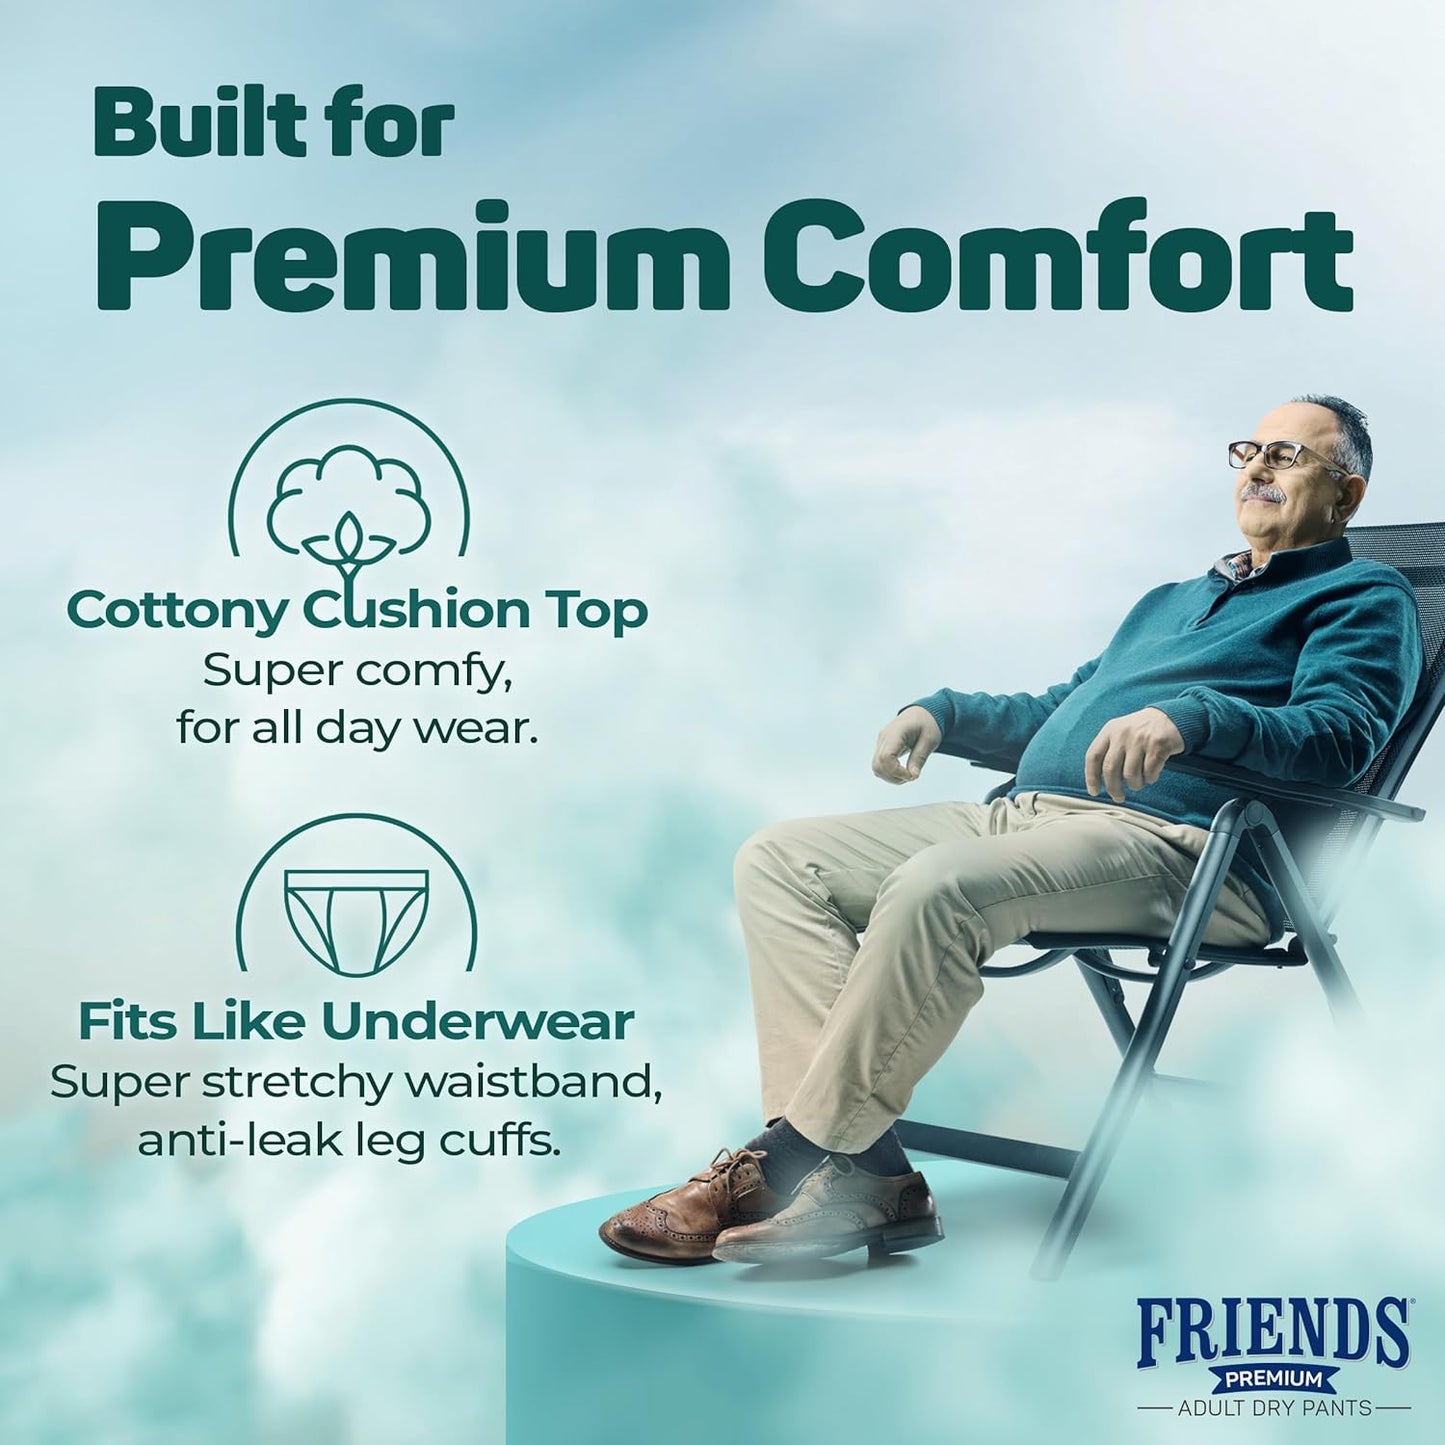 Friends Premium Adult Diapers Pant Style - 10 Count - with odour lock and Anti-Bacterial Absorbent Core